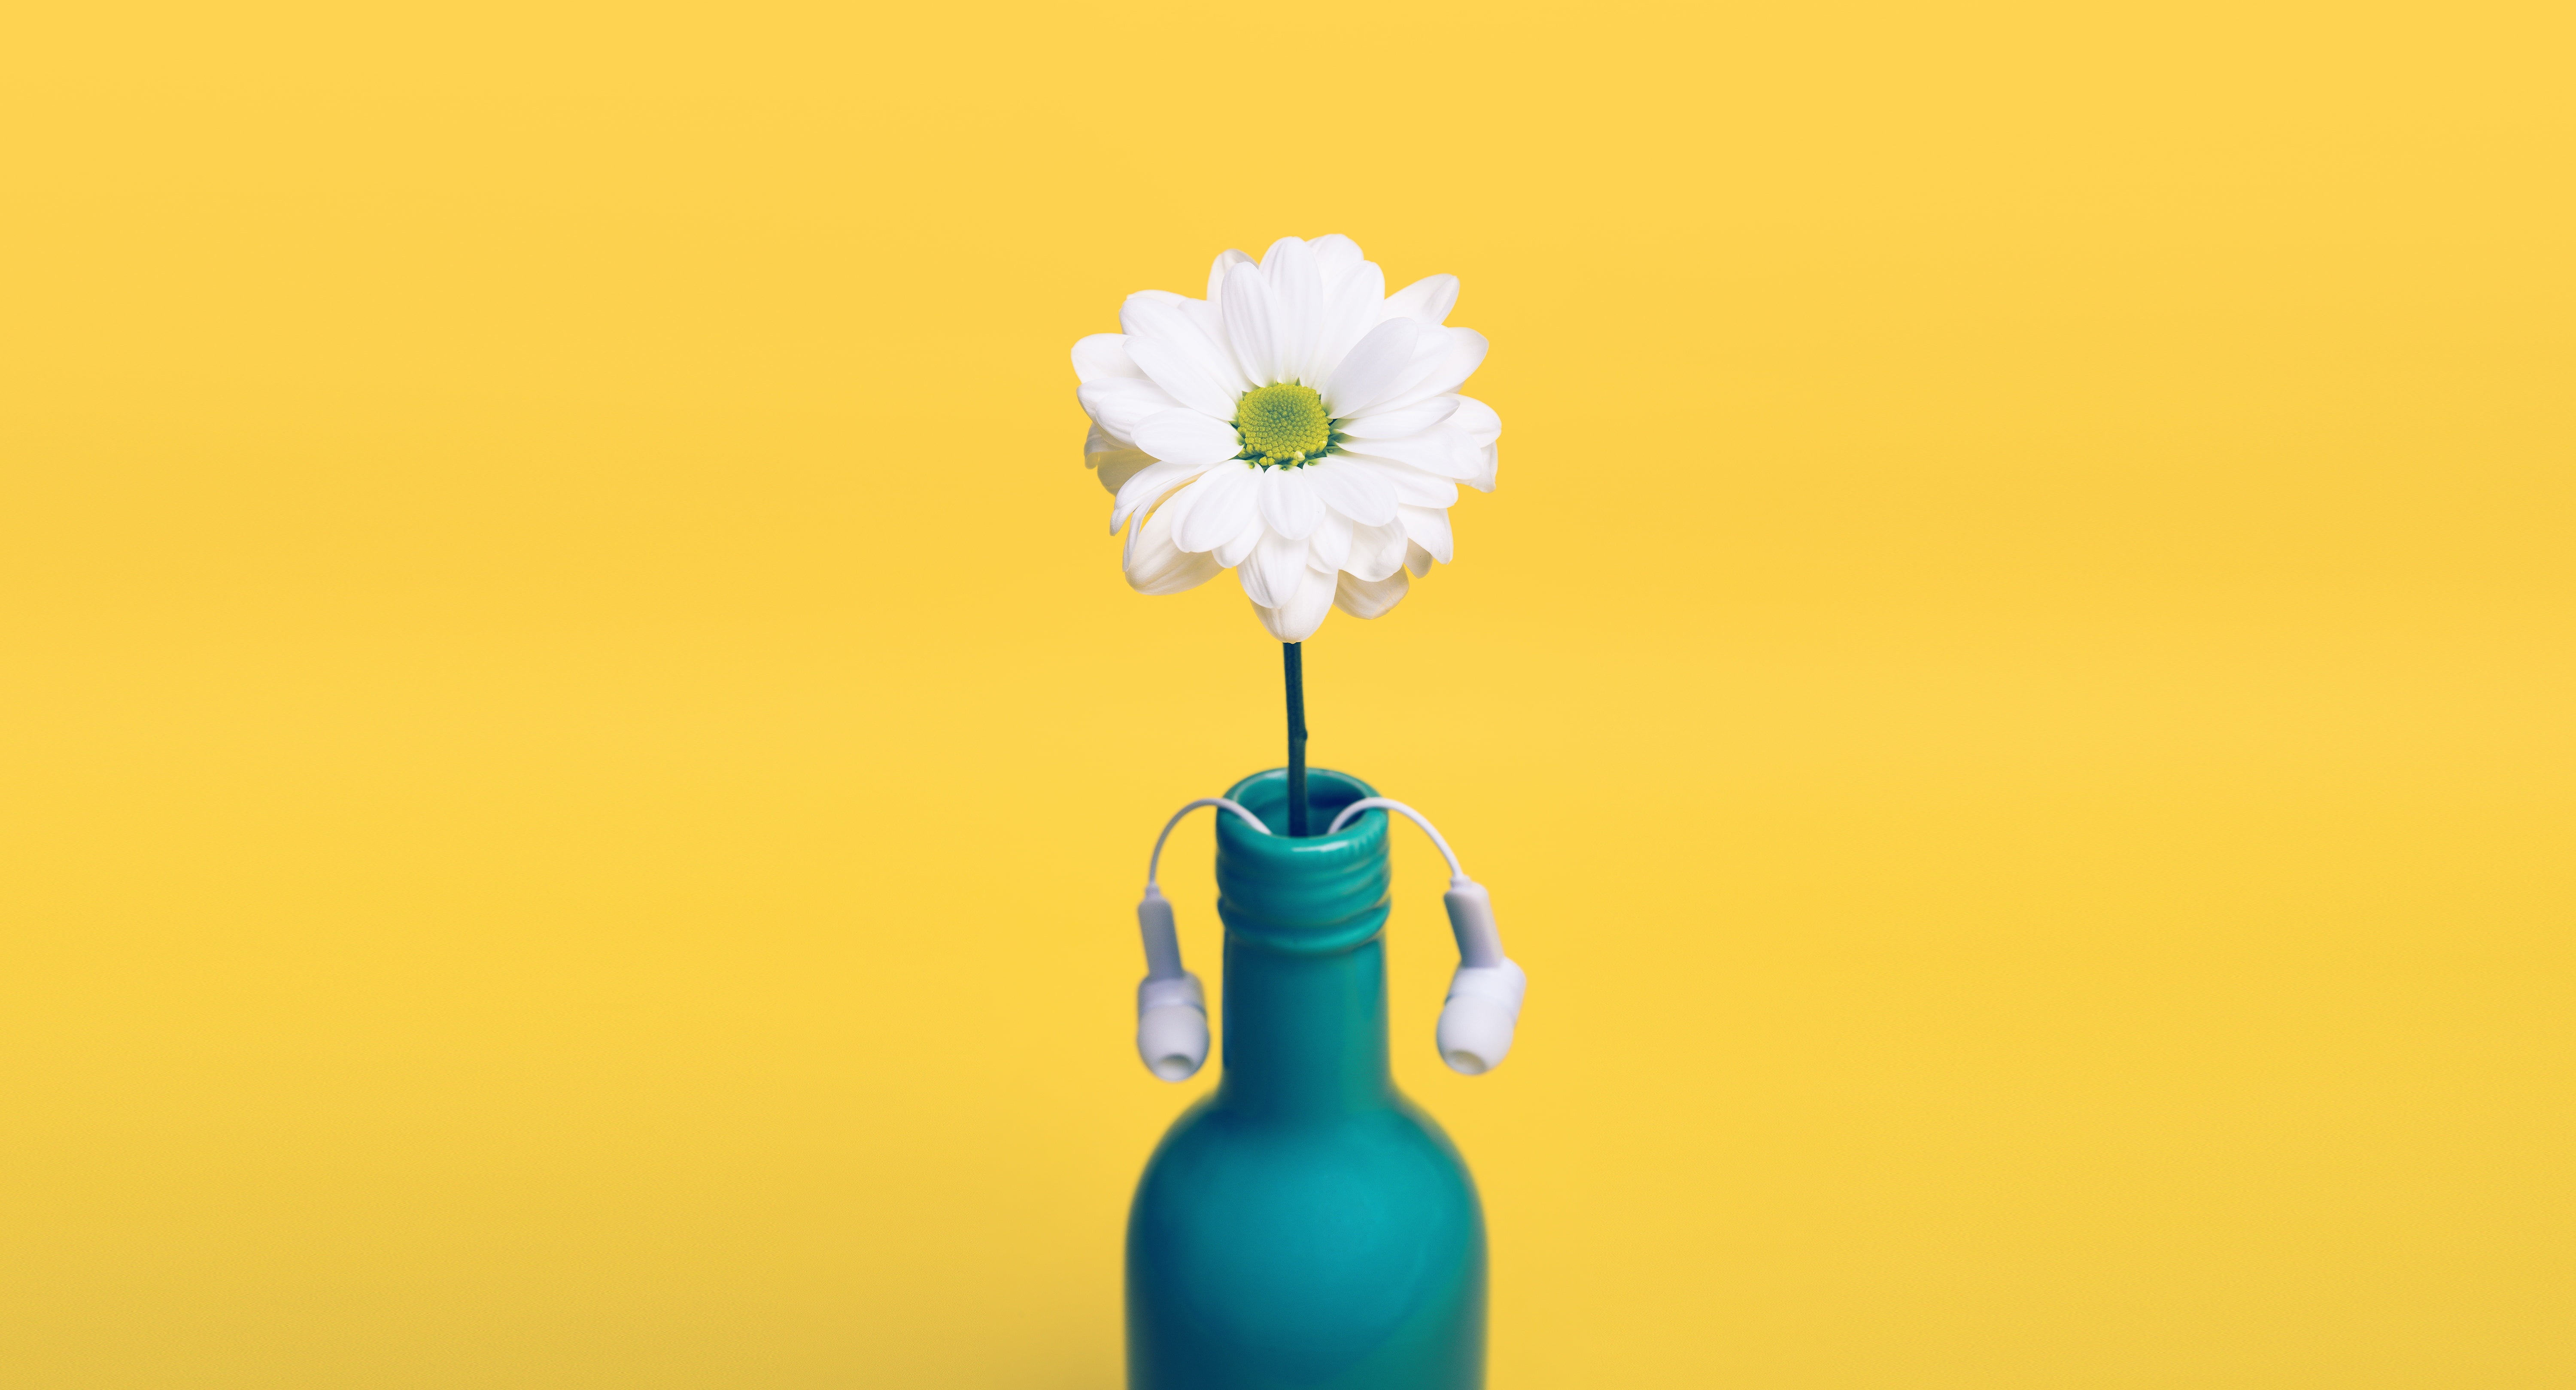 white petal flower in blue bottle vase with canal buds